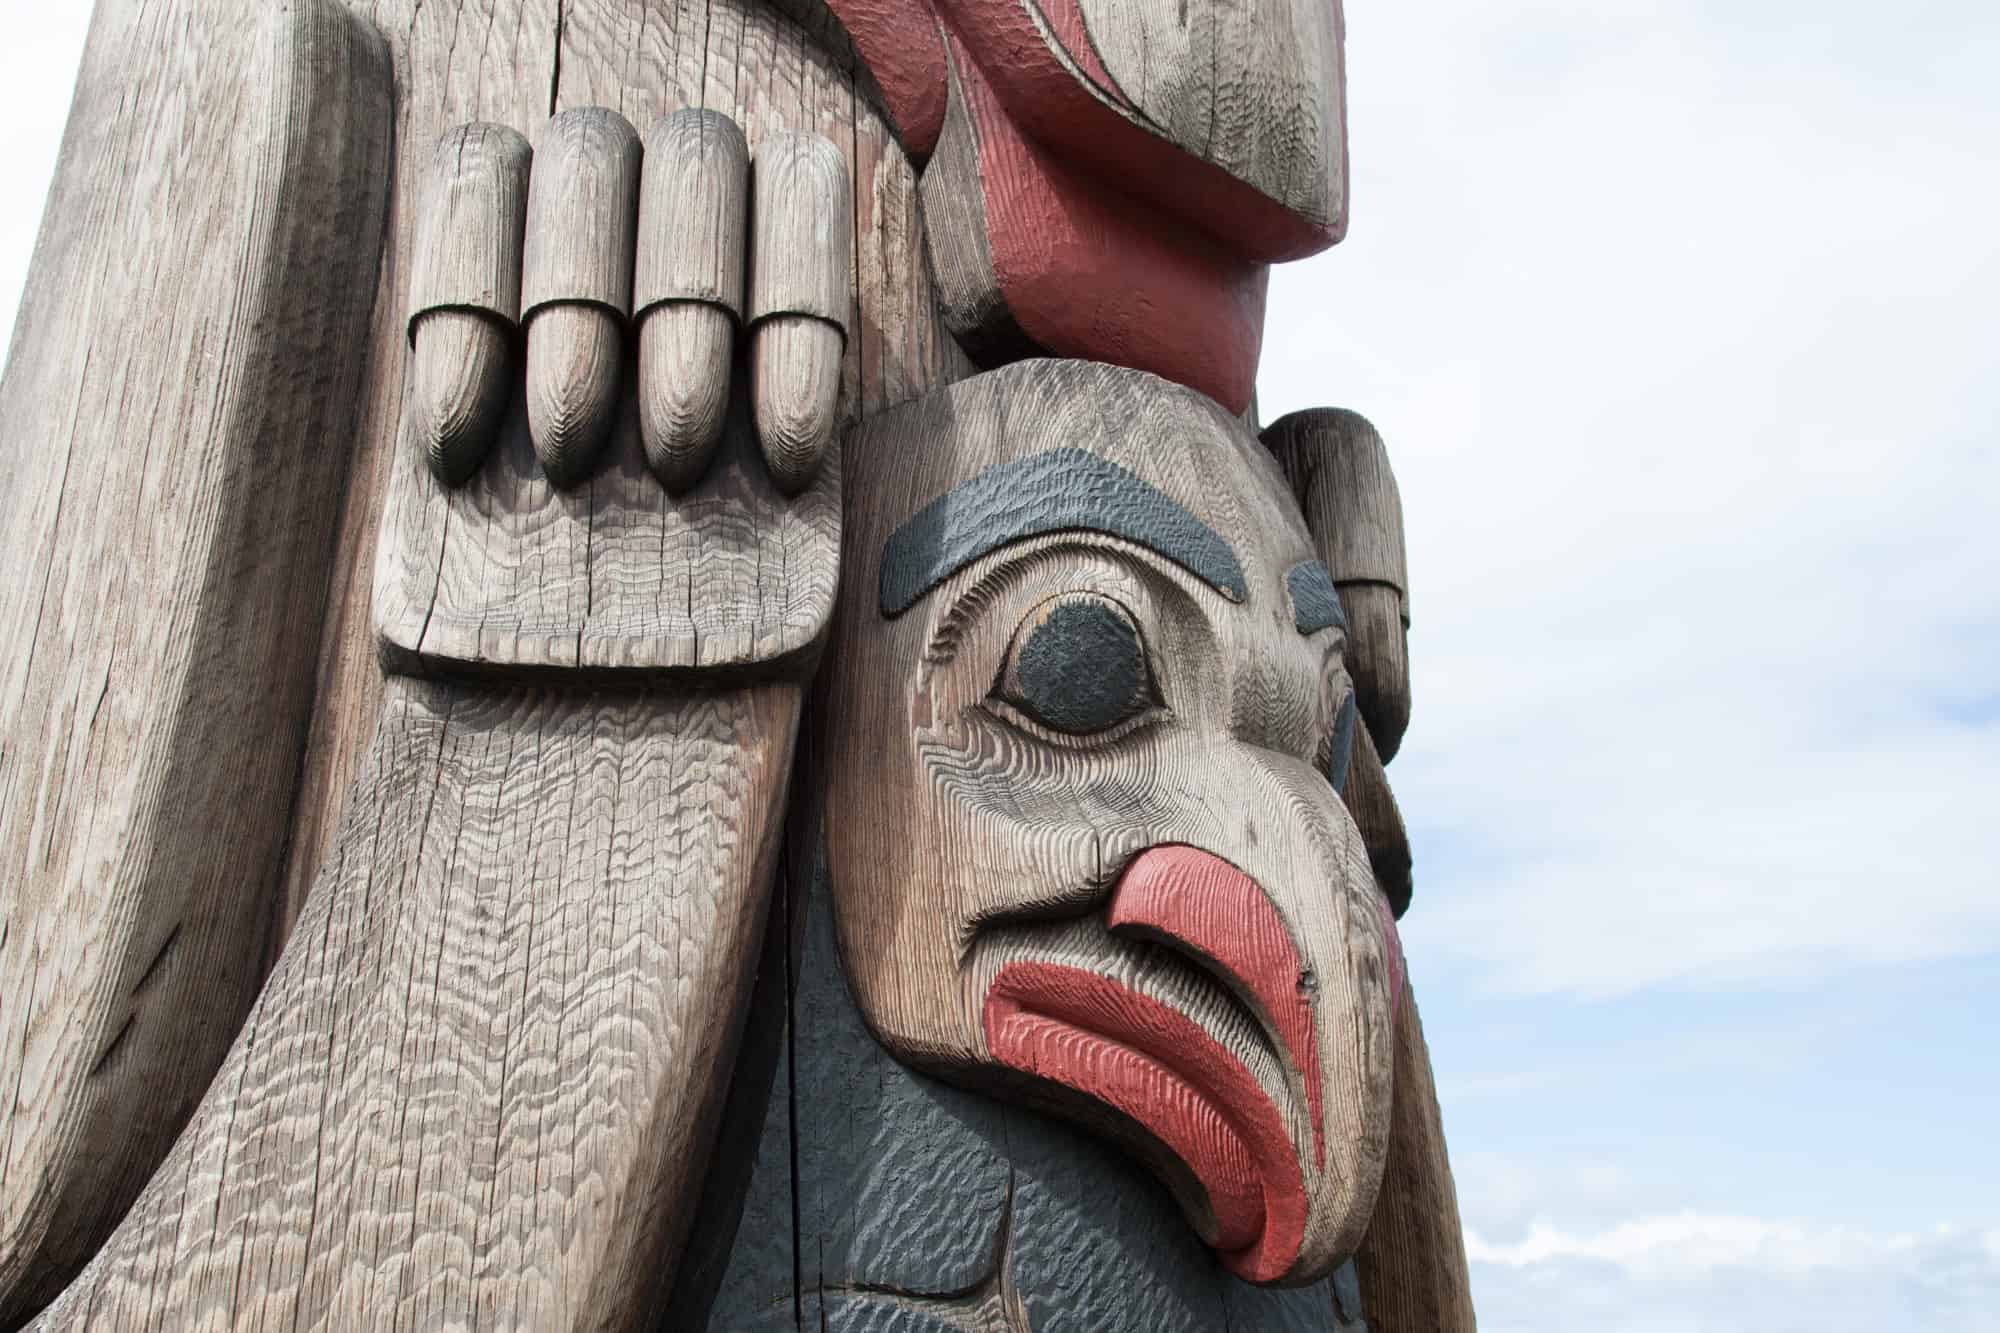 close-up of one of the totem poles that adorn seattle, this one is a bird like creature with a long beak